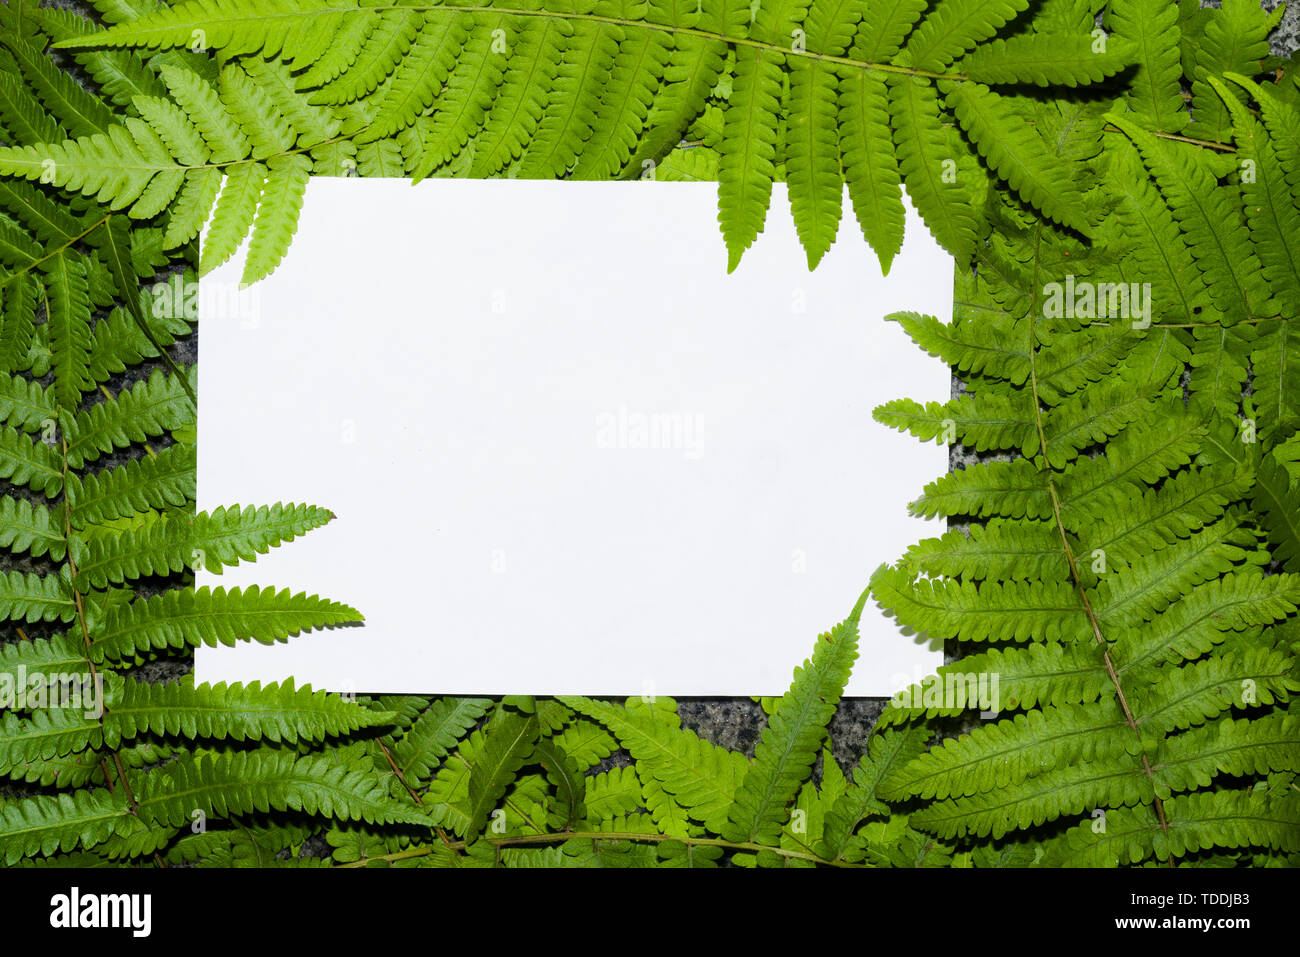 Fern leaves with white blank paper card. Nature concept. Leaves of ferns in forest. Stock Photo